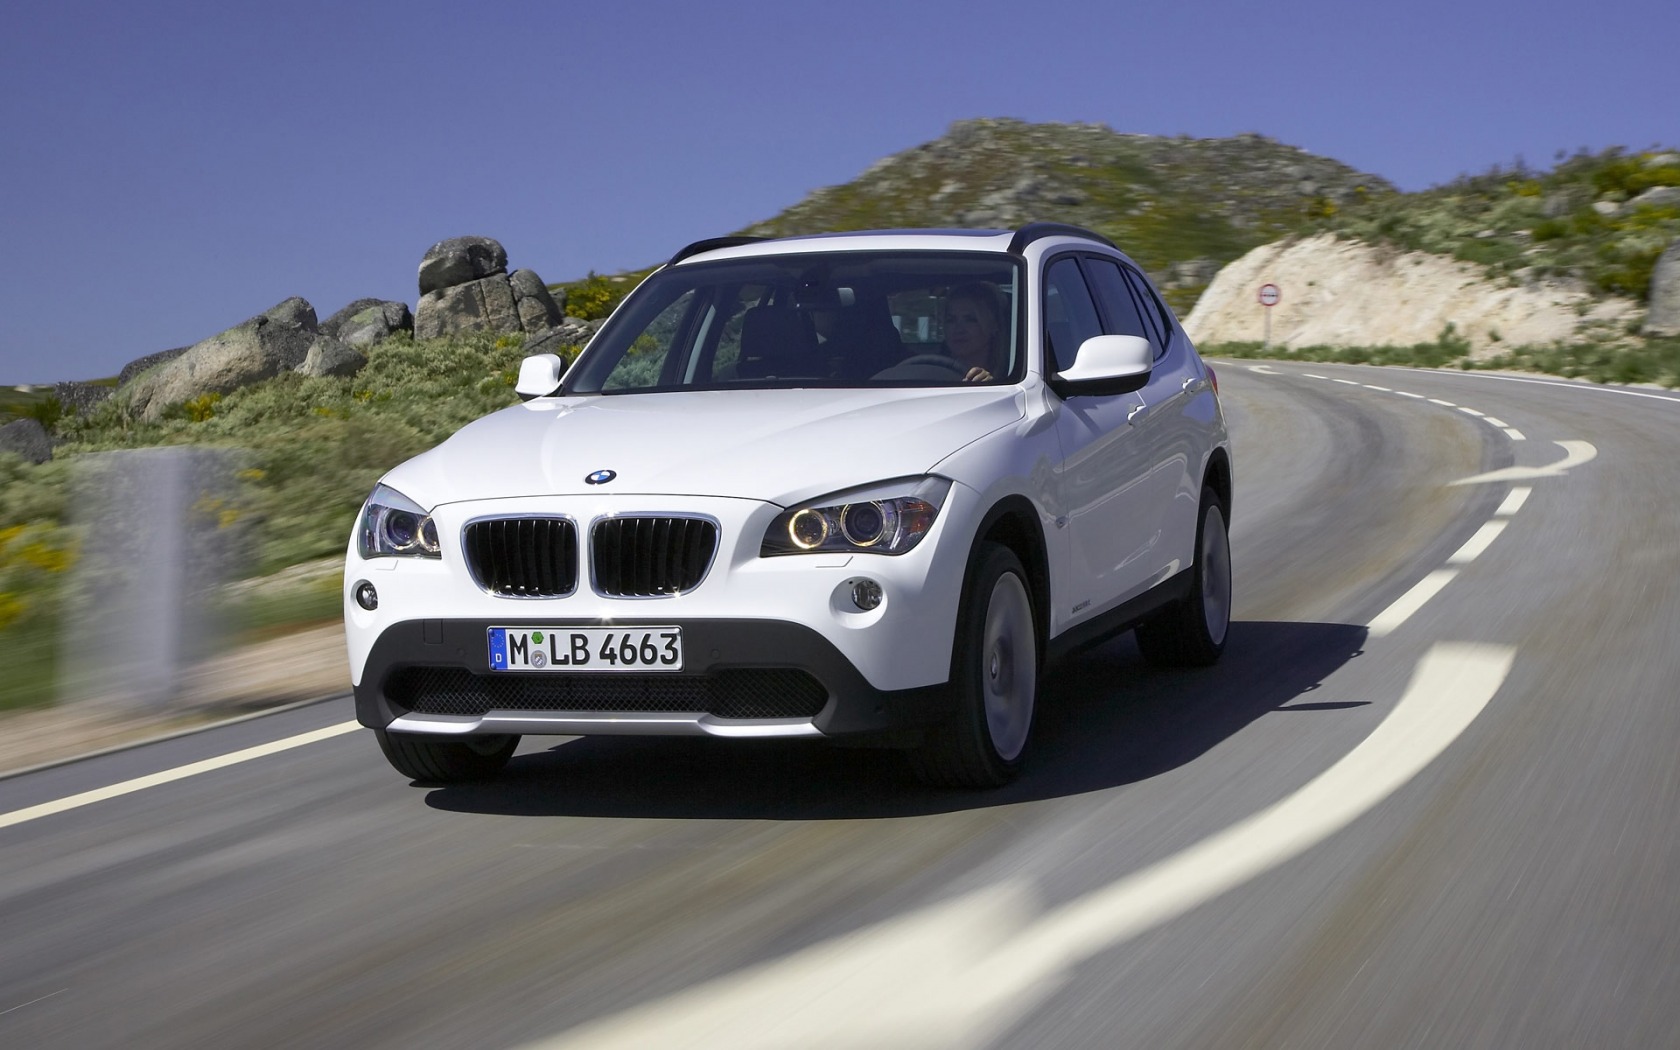 BMW X1 Wallpaper BMW Cars Wallpapers in jpg format for free download